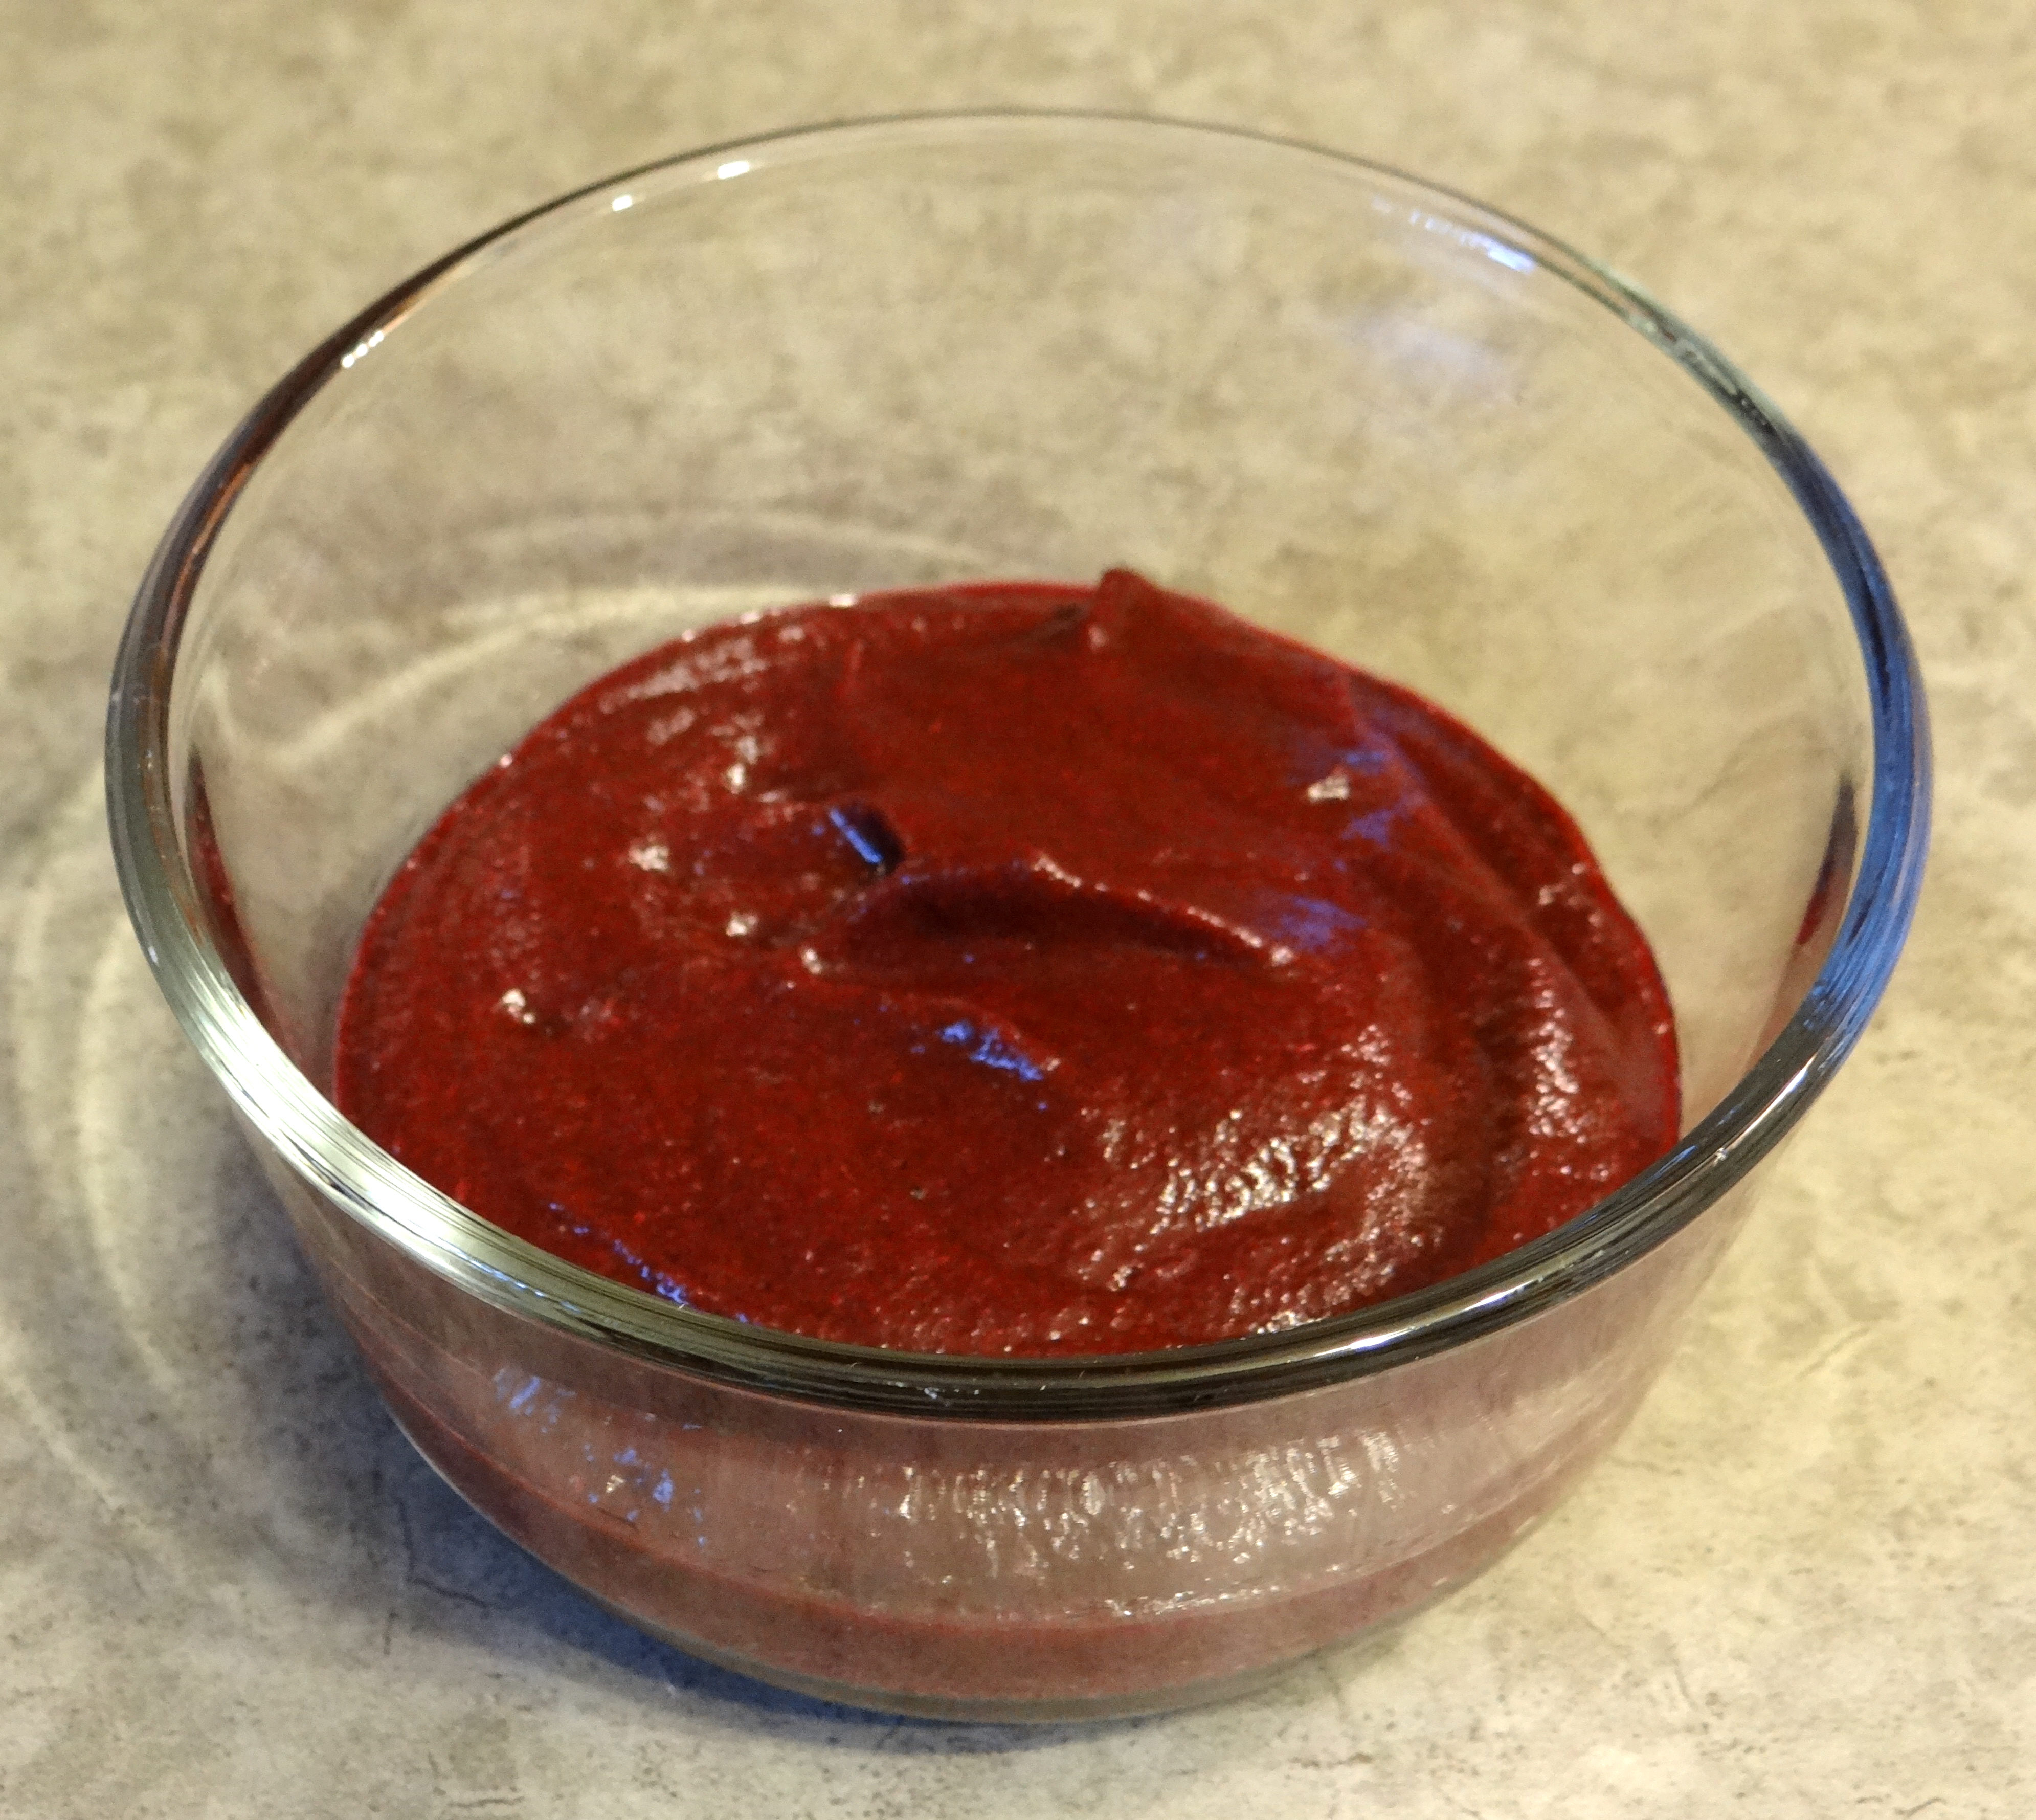 Organic baby food made with beets, spinach, and pears